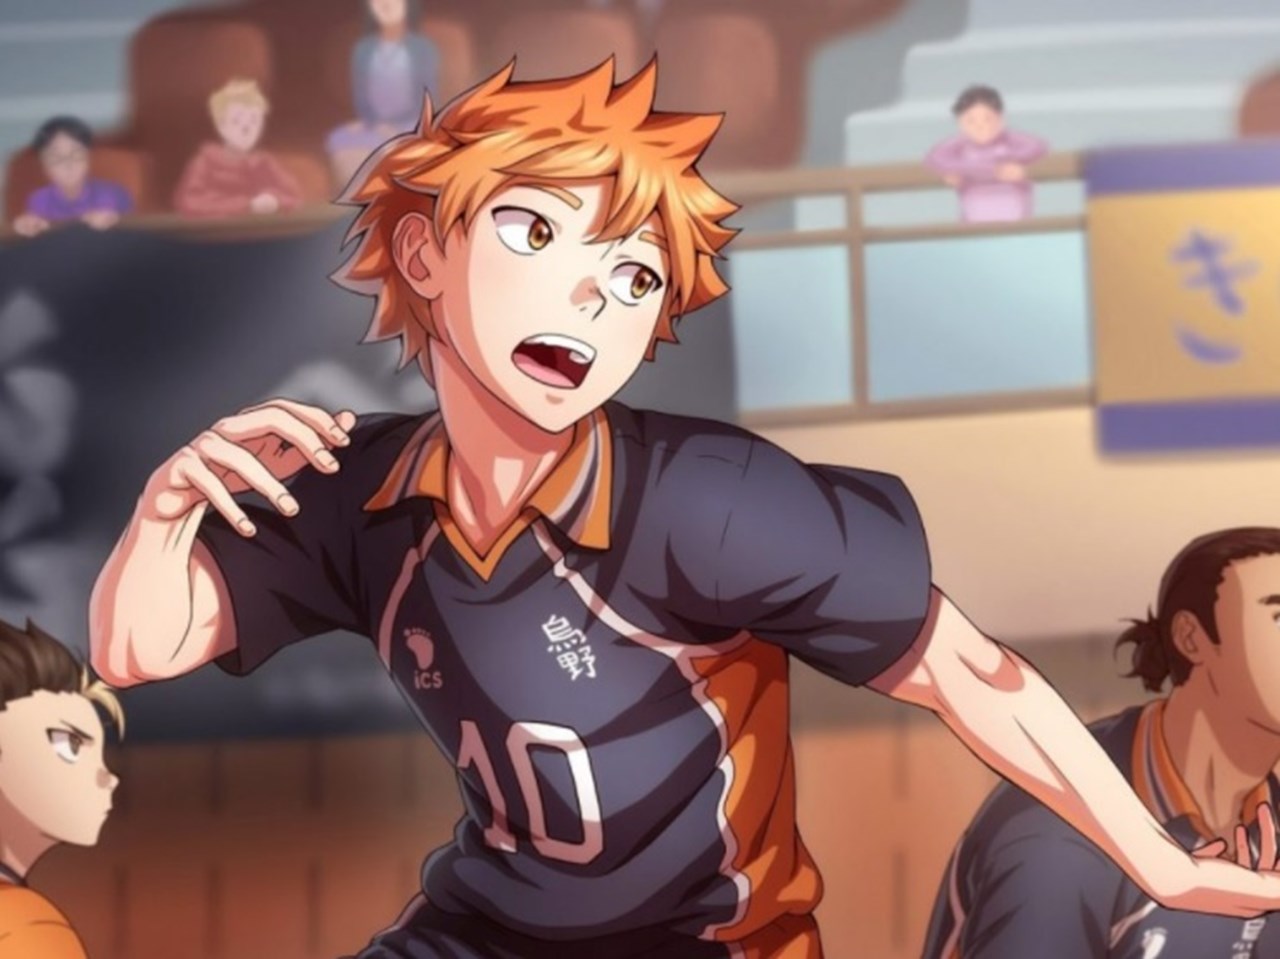 Why does the animation of 'Haikyuu' season 4 part 2 look so different from  previous seasons? - Quora